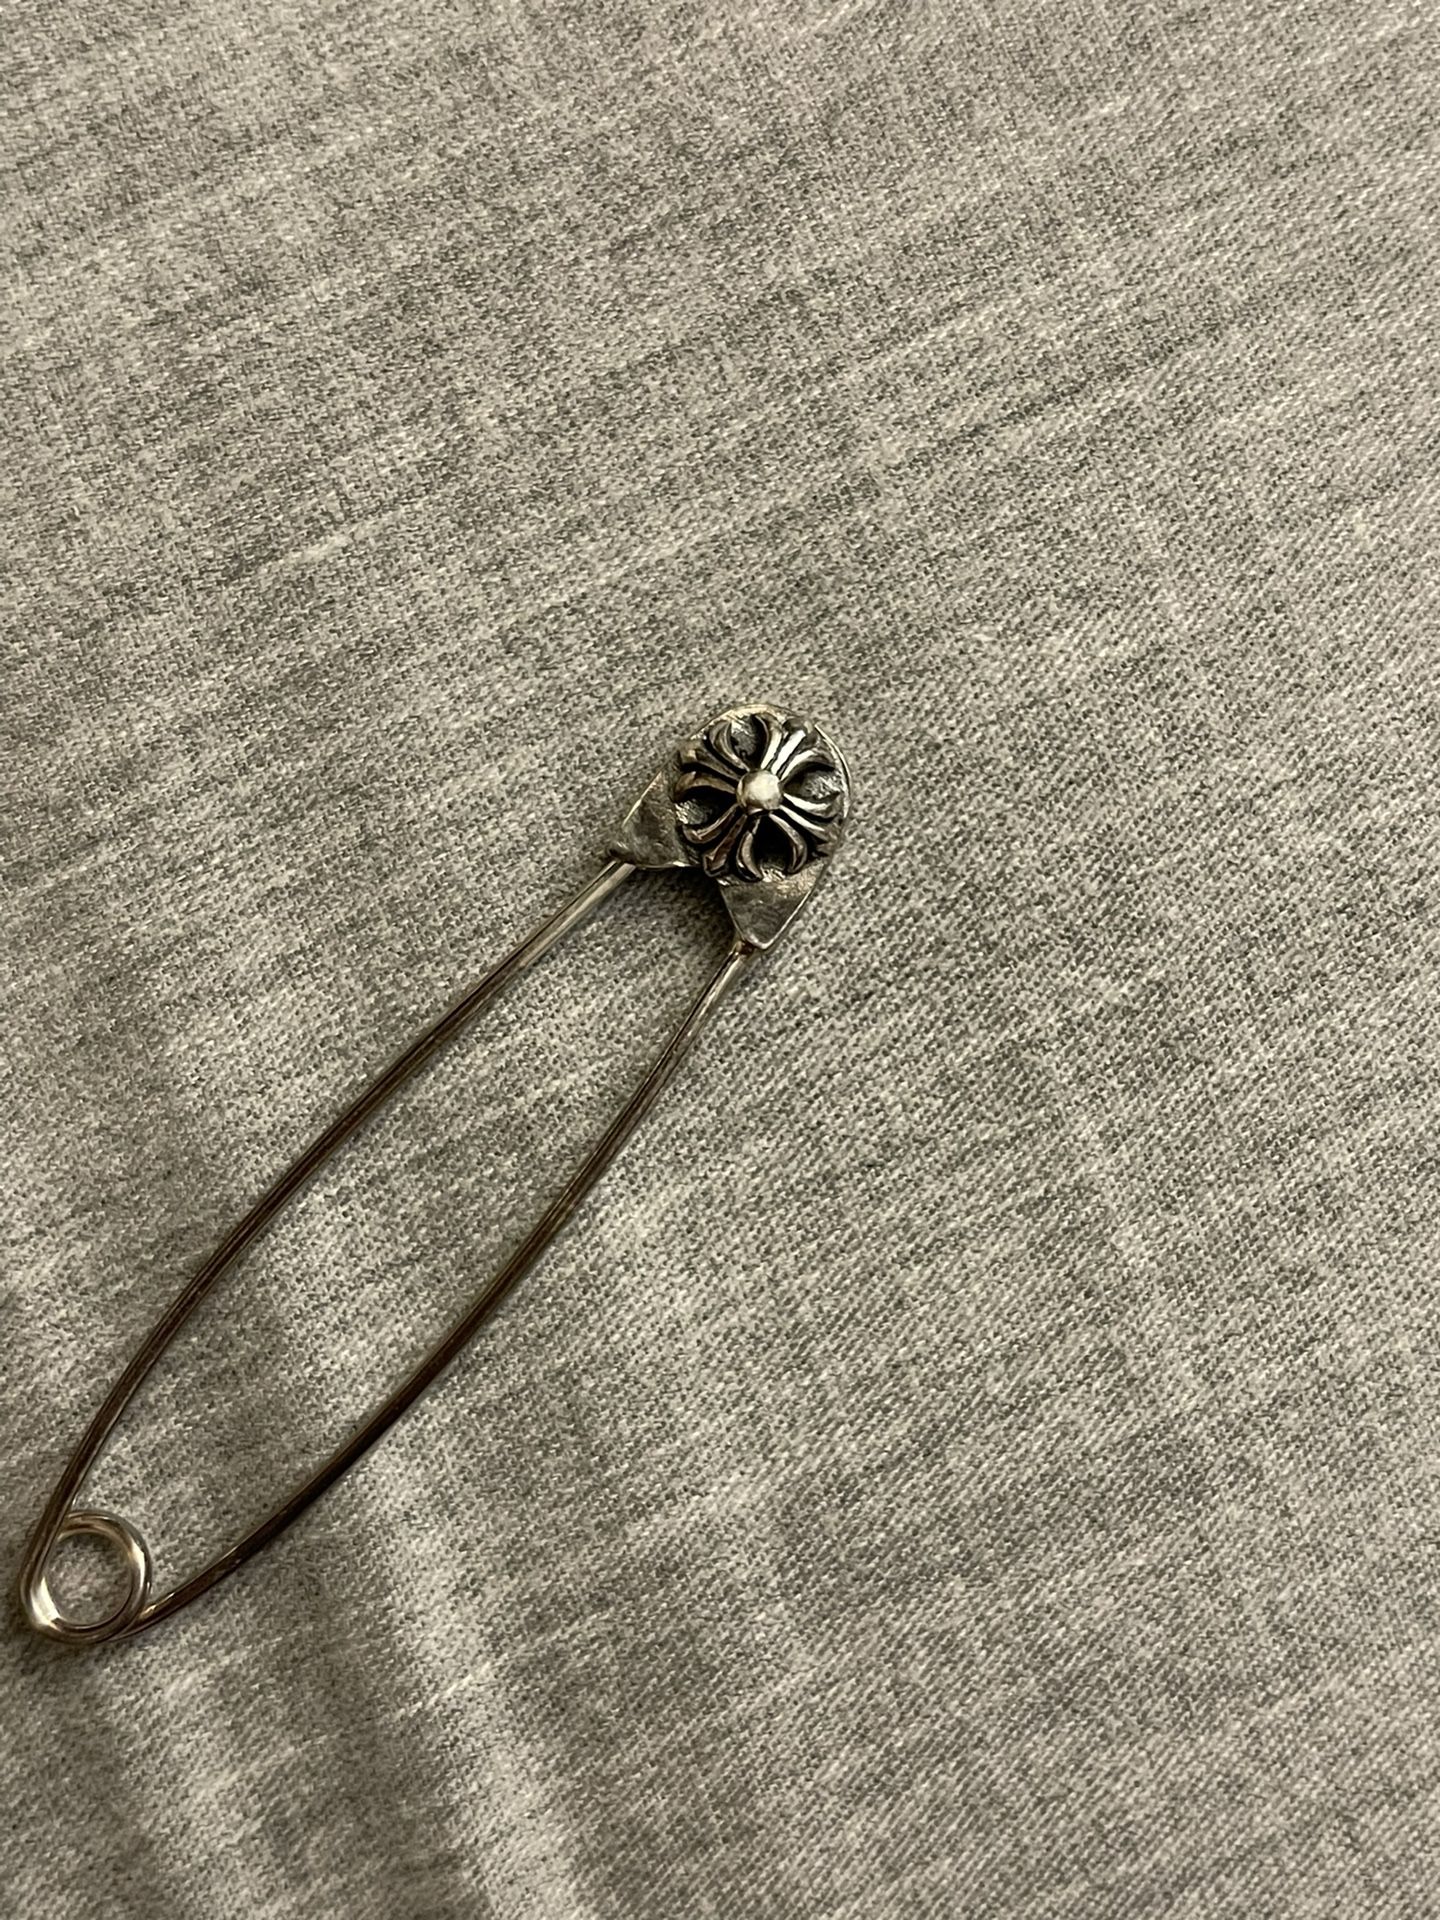 Chrome Hearts Safety Pin